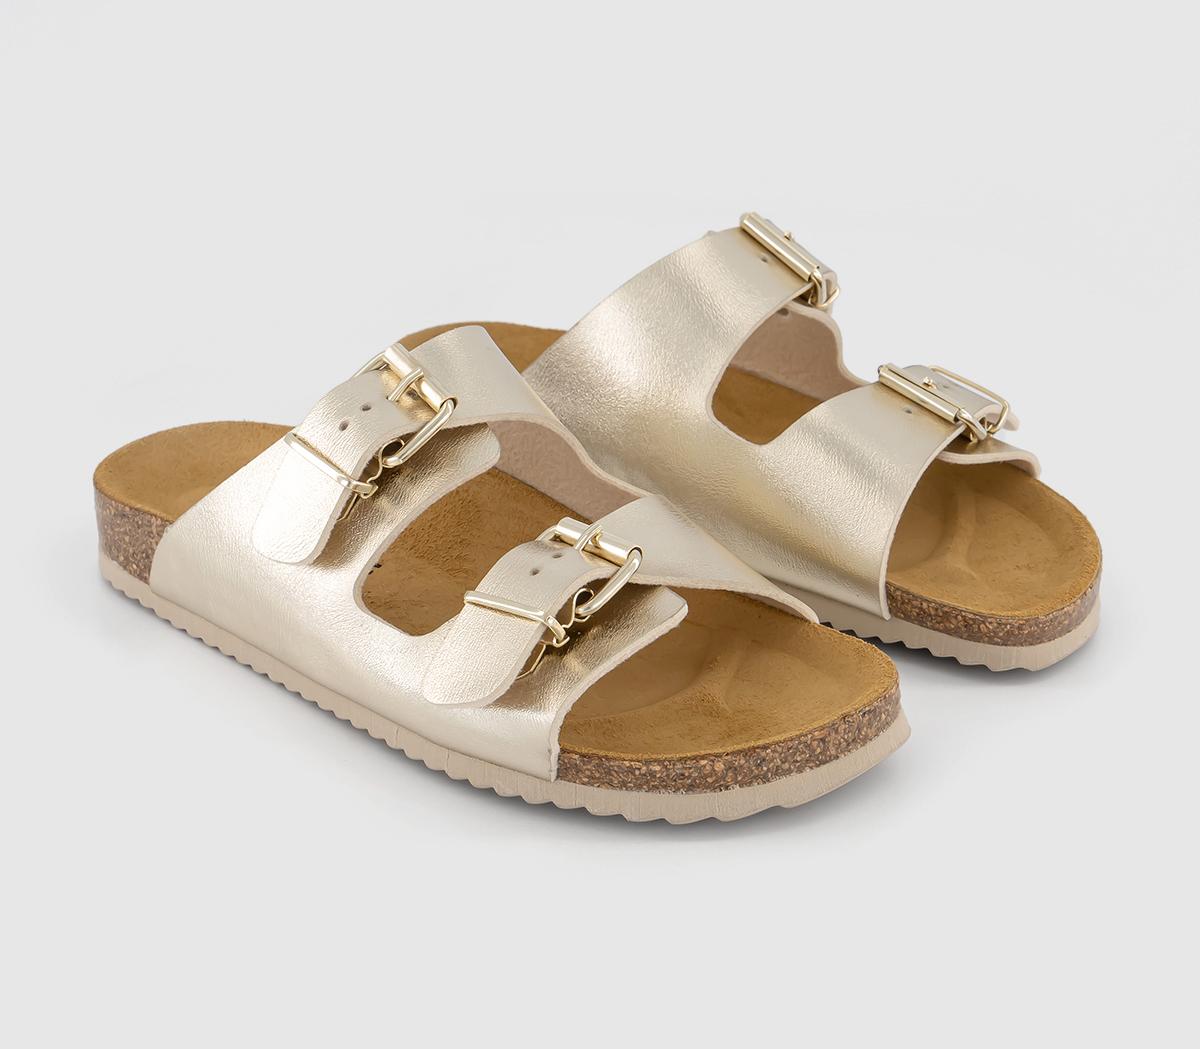 OFFICE Womens Seville Double Buckle Sandals Gold, 6